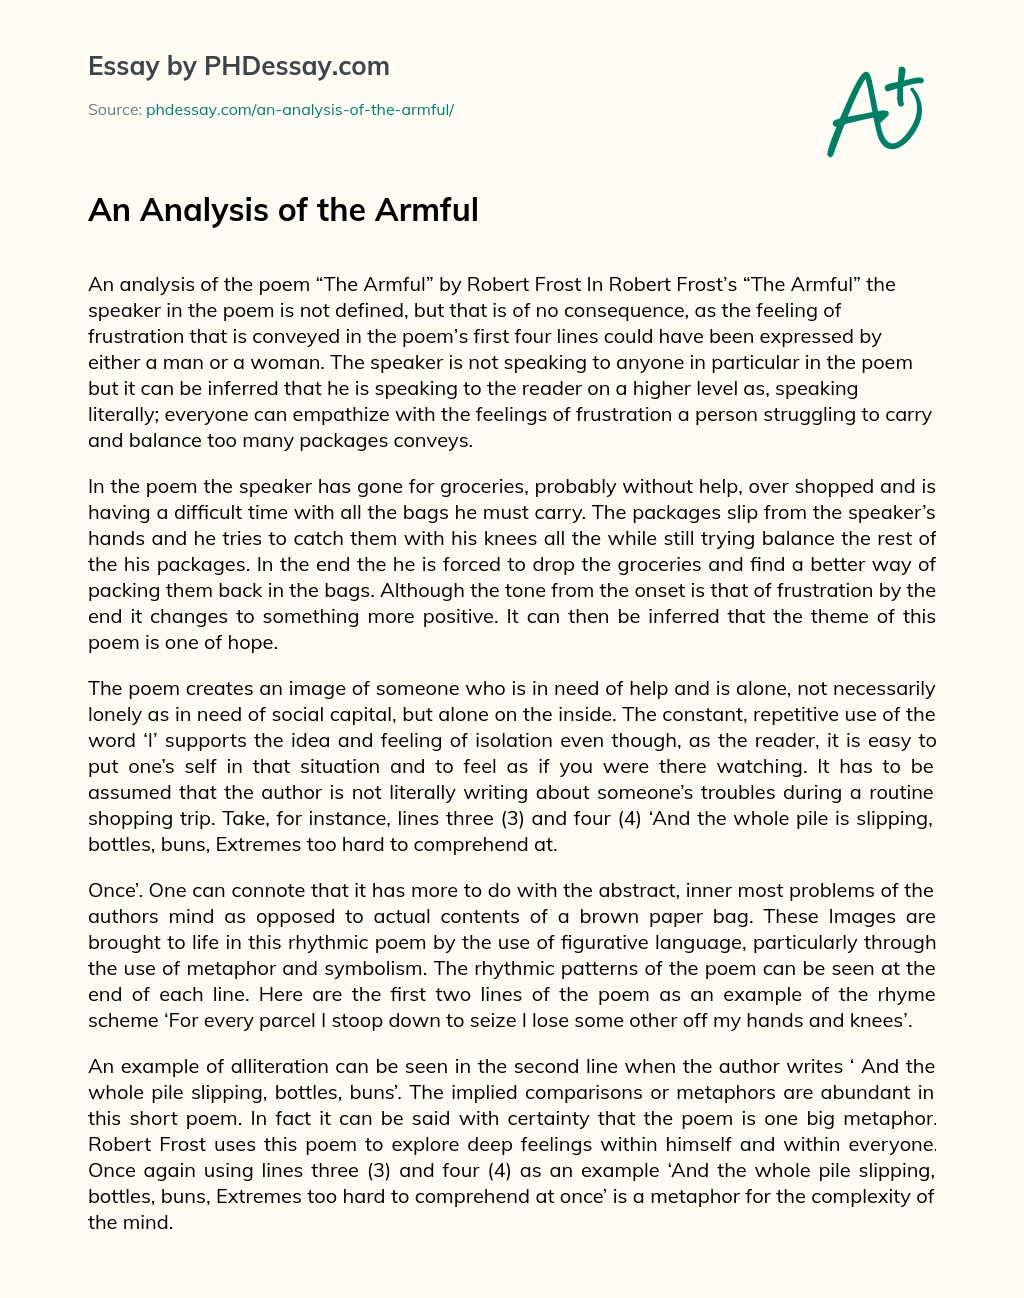 An Analysis of the Armful essay